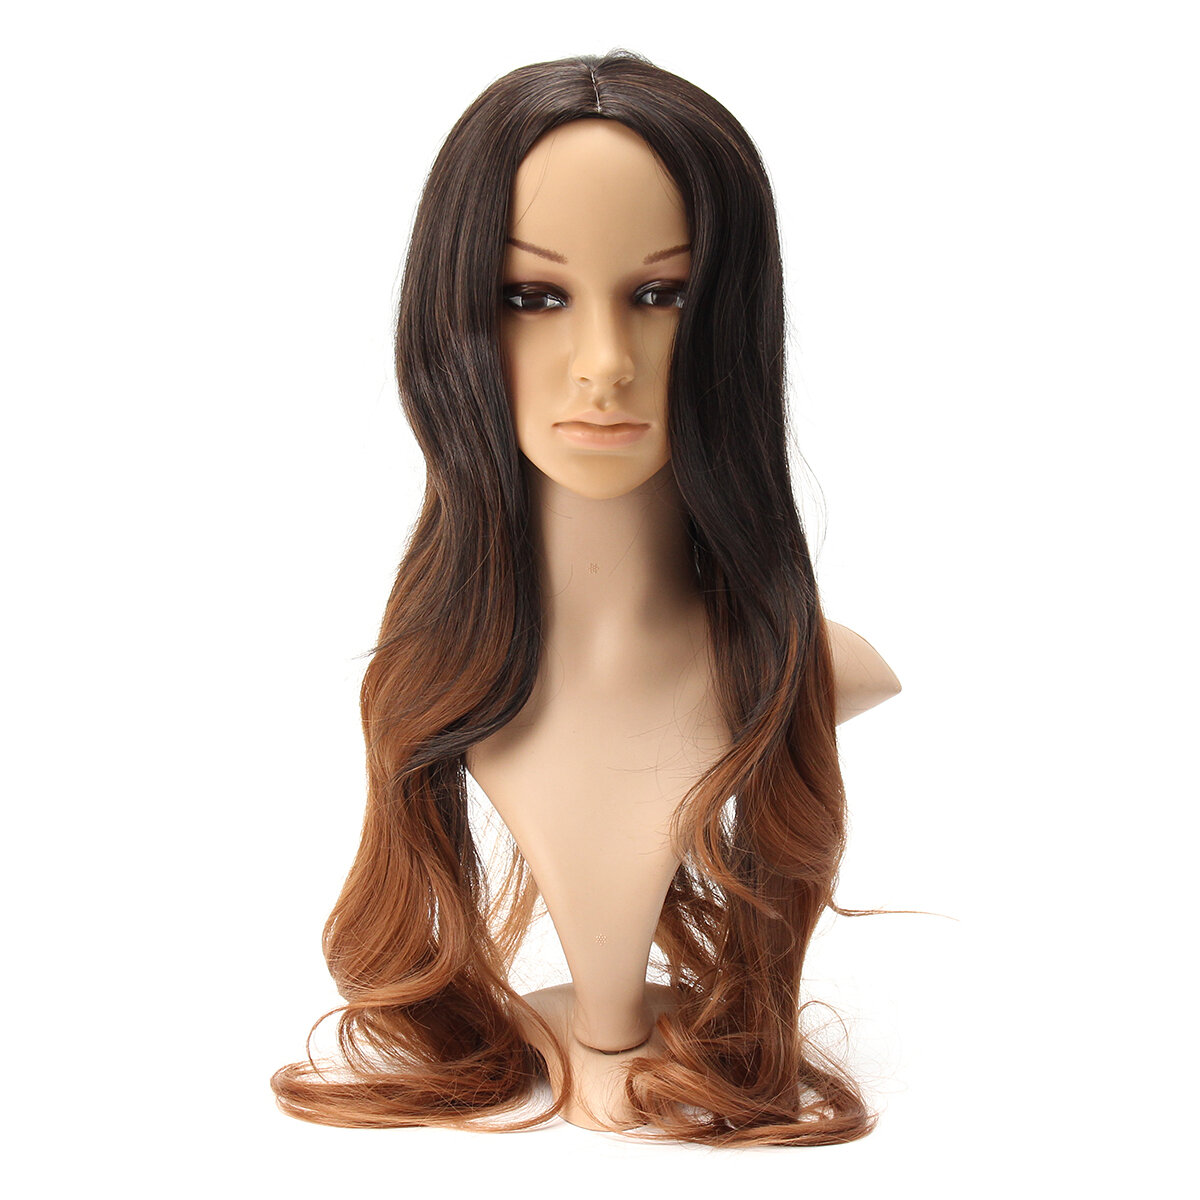 Women's Long Wavy Curly Hair Cosplay Party Wig